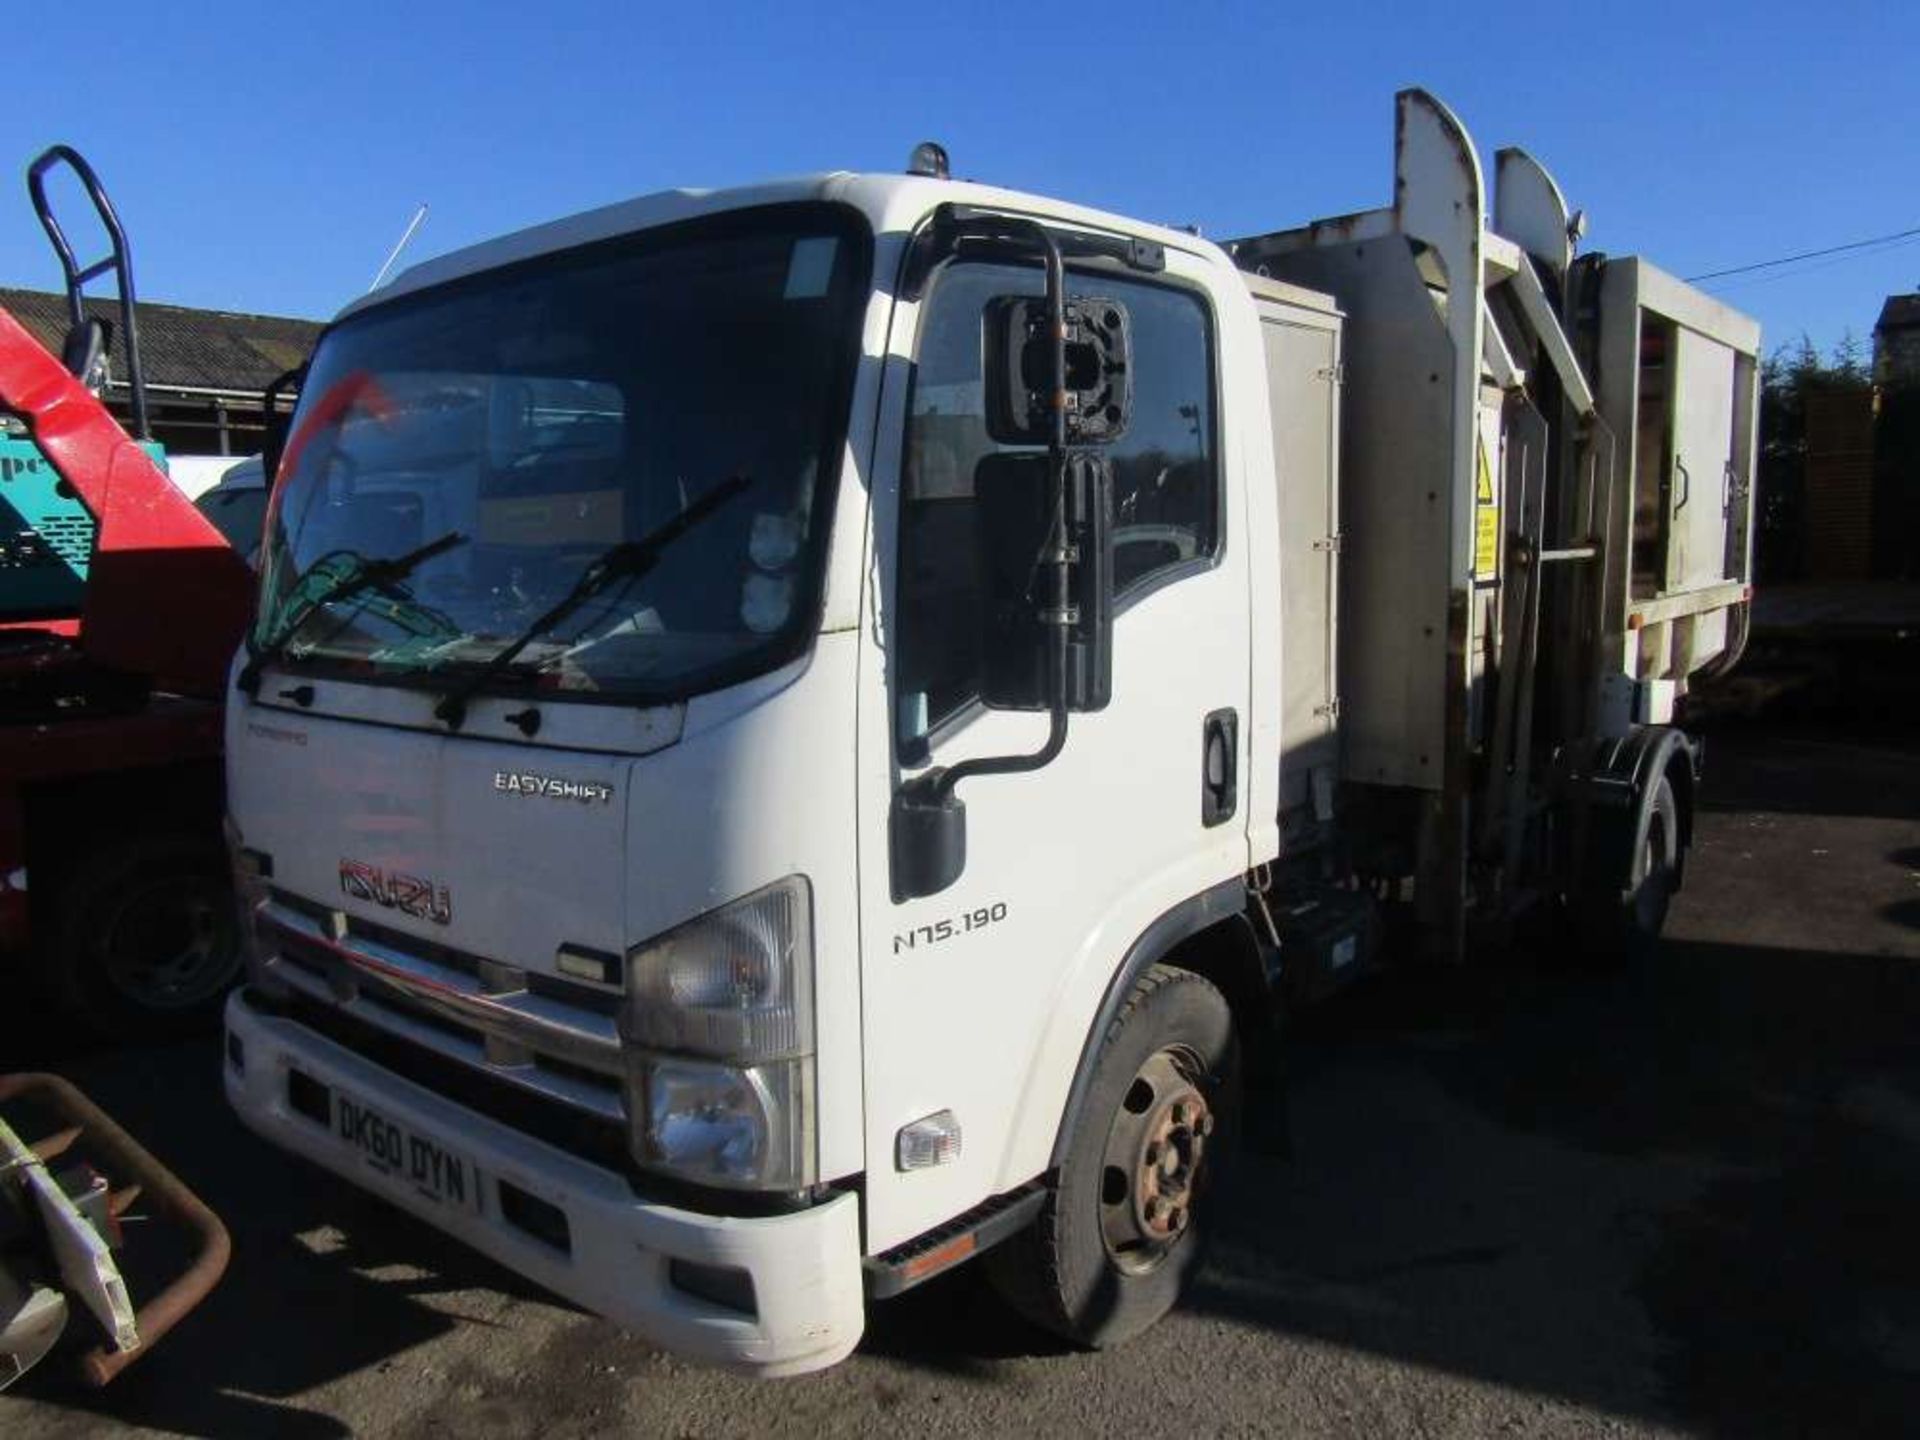 2010 60 reg Isuzu N75.190 Food Waste Collector with Link Tip Side Lifter (Direct Council) - Image 2 of 6